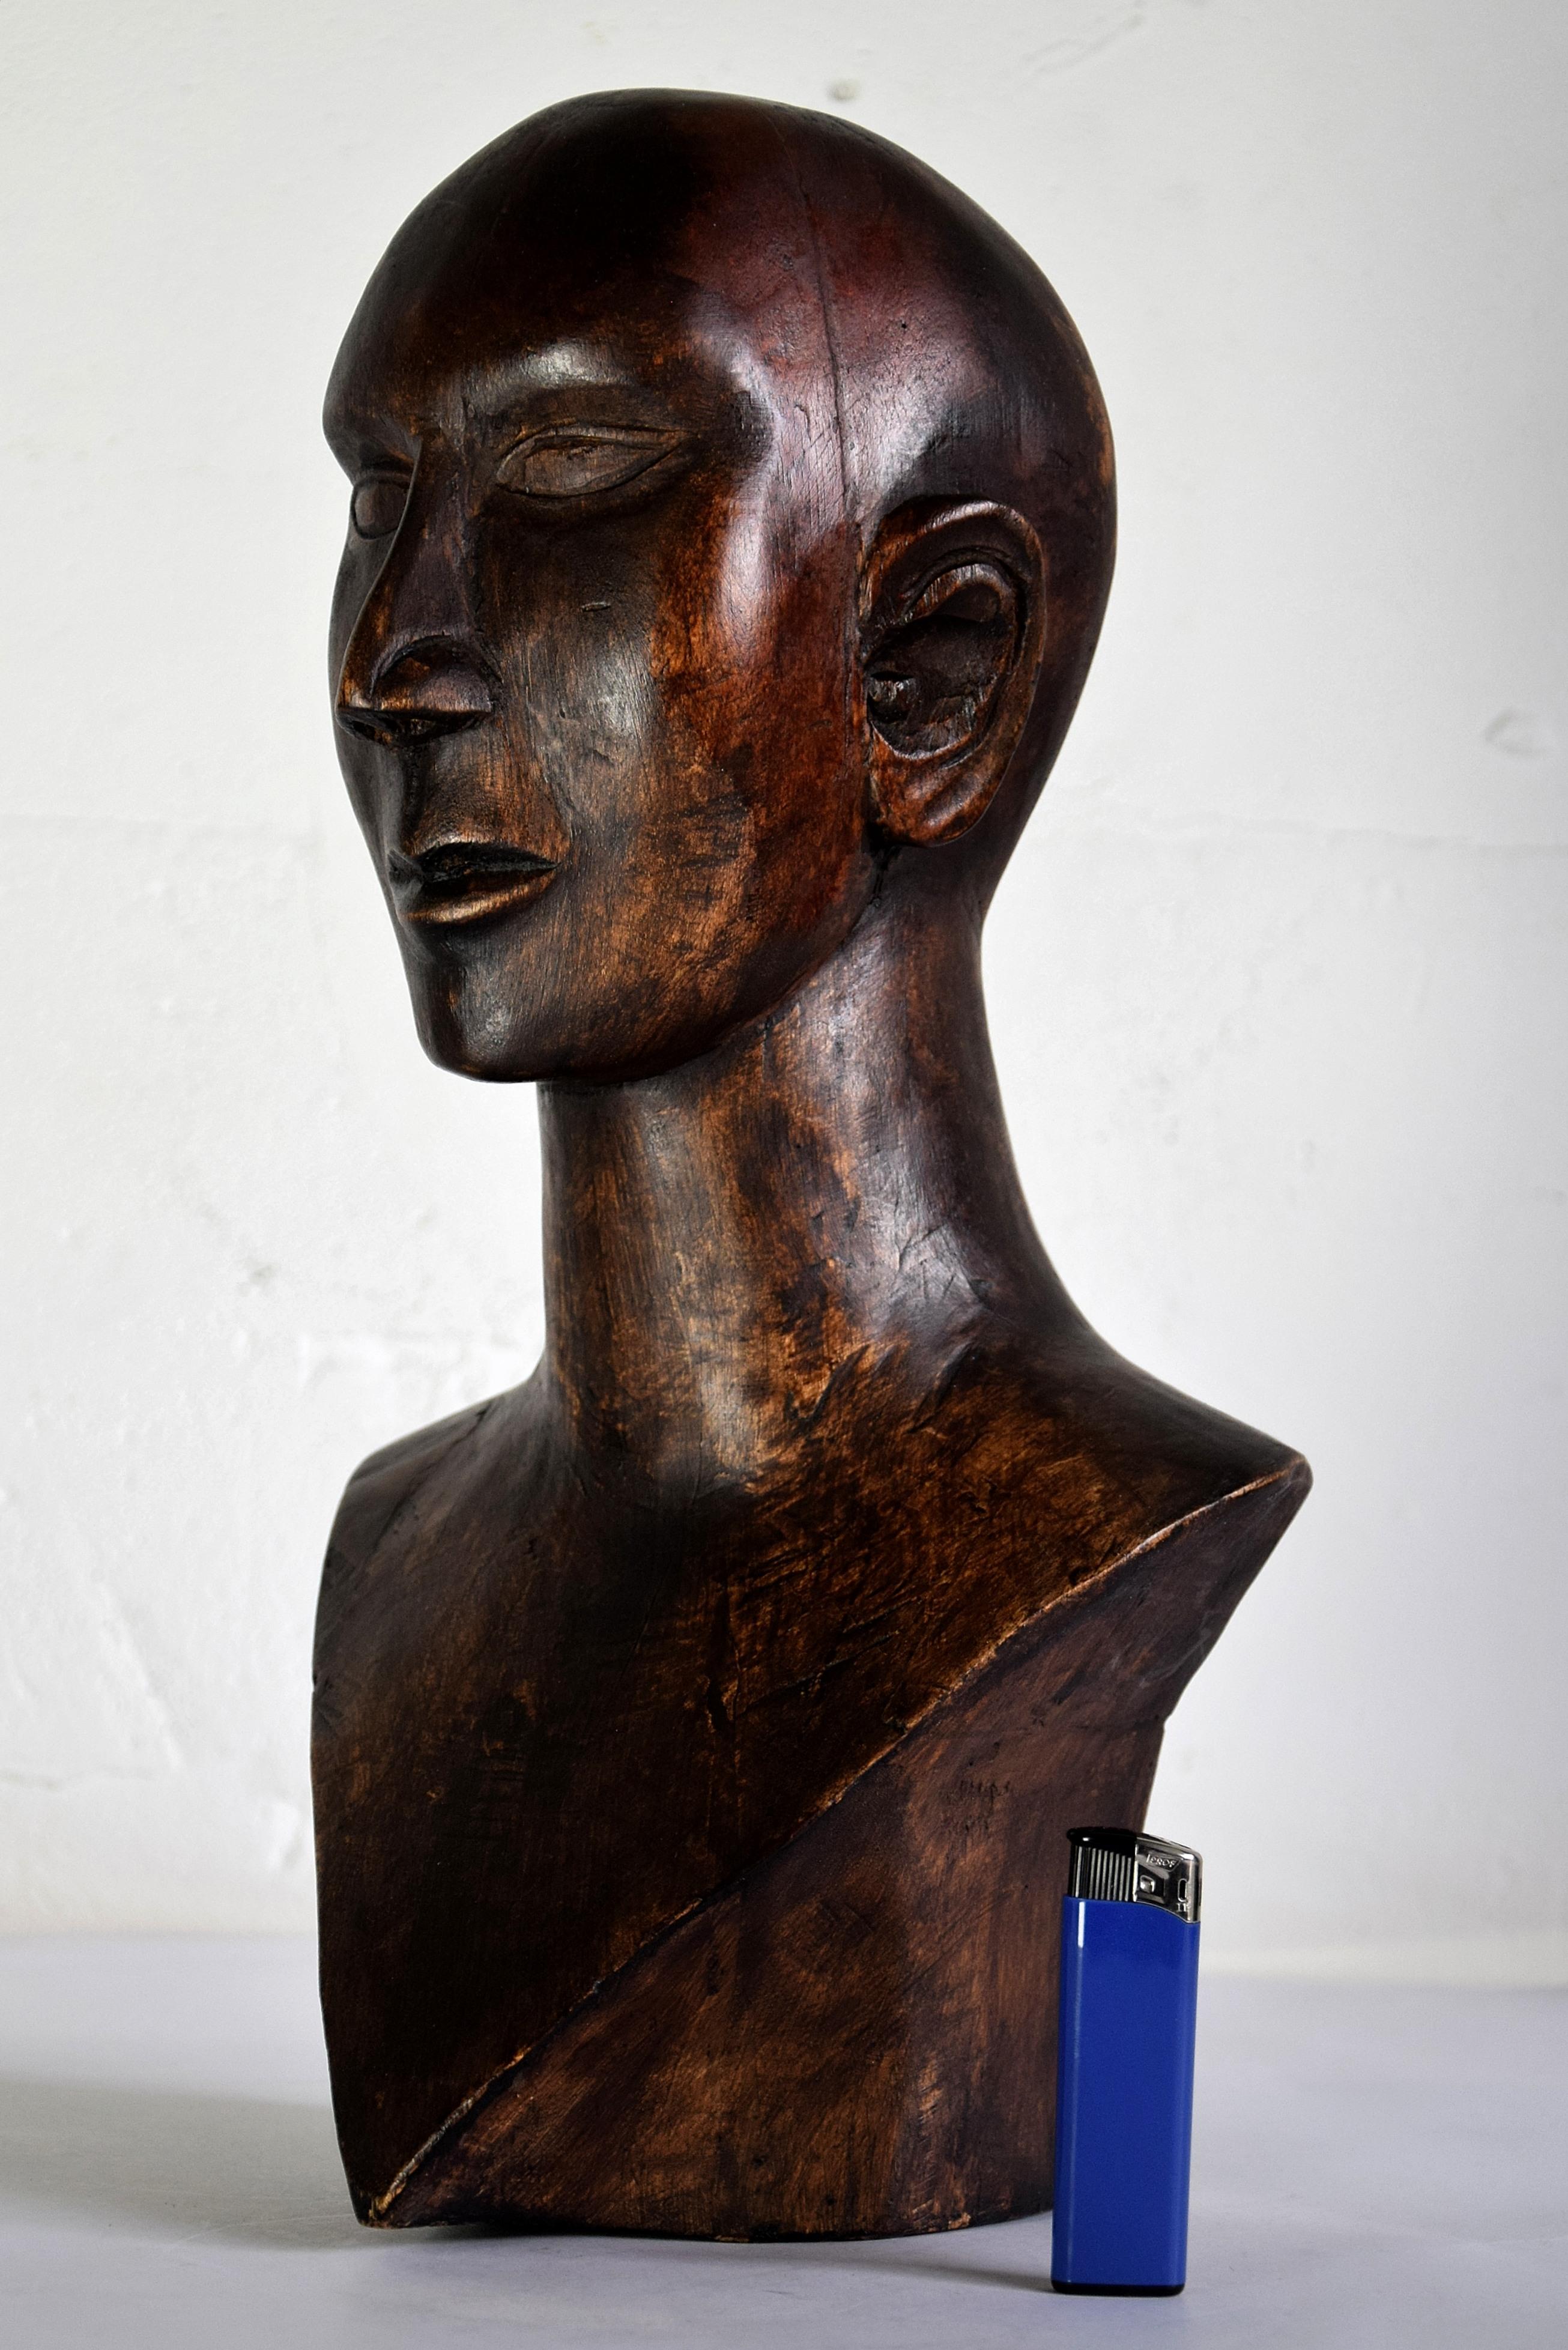 One of a kind beautiful mid-century masculine sculpture cut from one piece of wood. A truly gorgeous piece, a diamond in kust about any interior.
The Testa will be shipped overseas in a custom made wooden crate. Cost of transport is crate included.